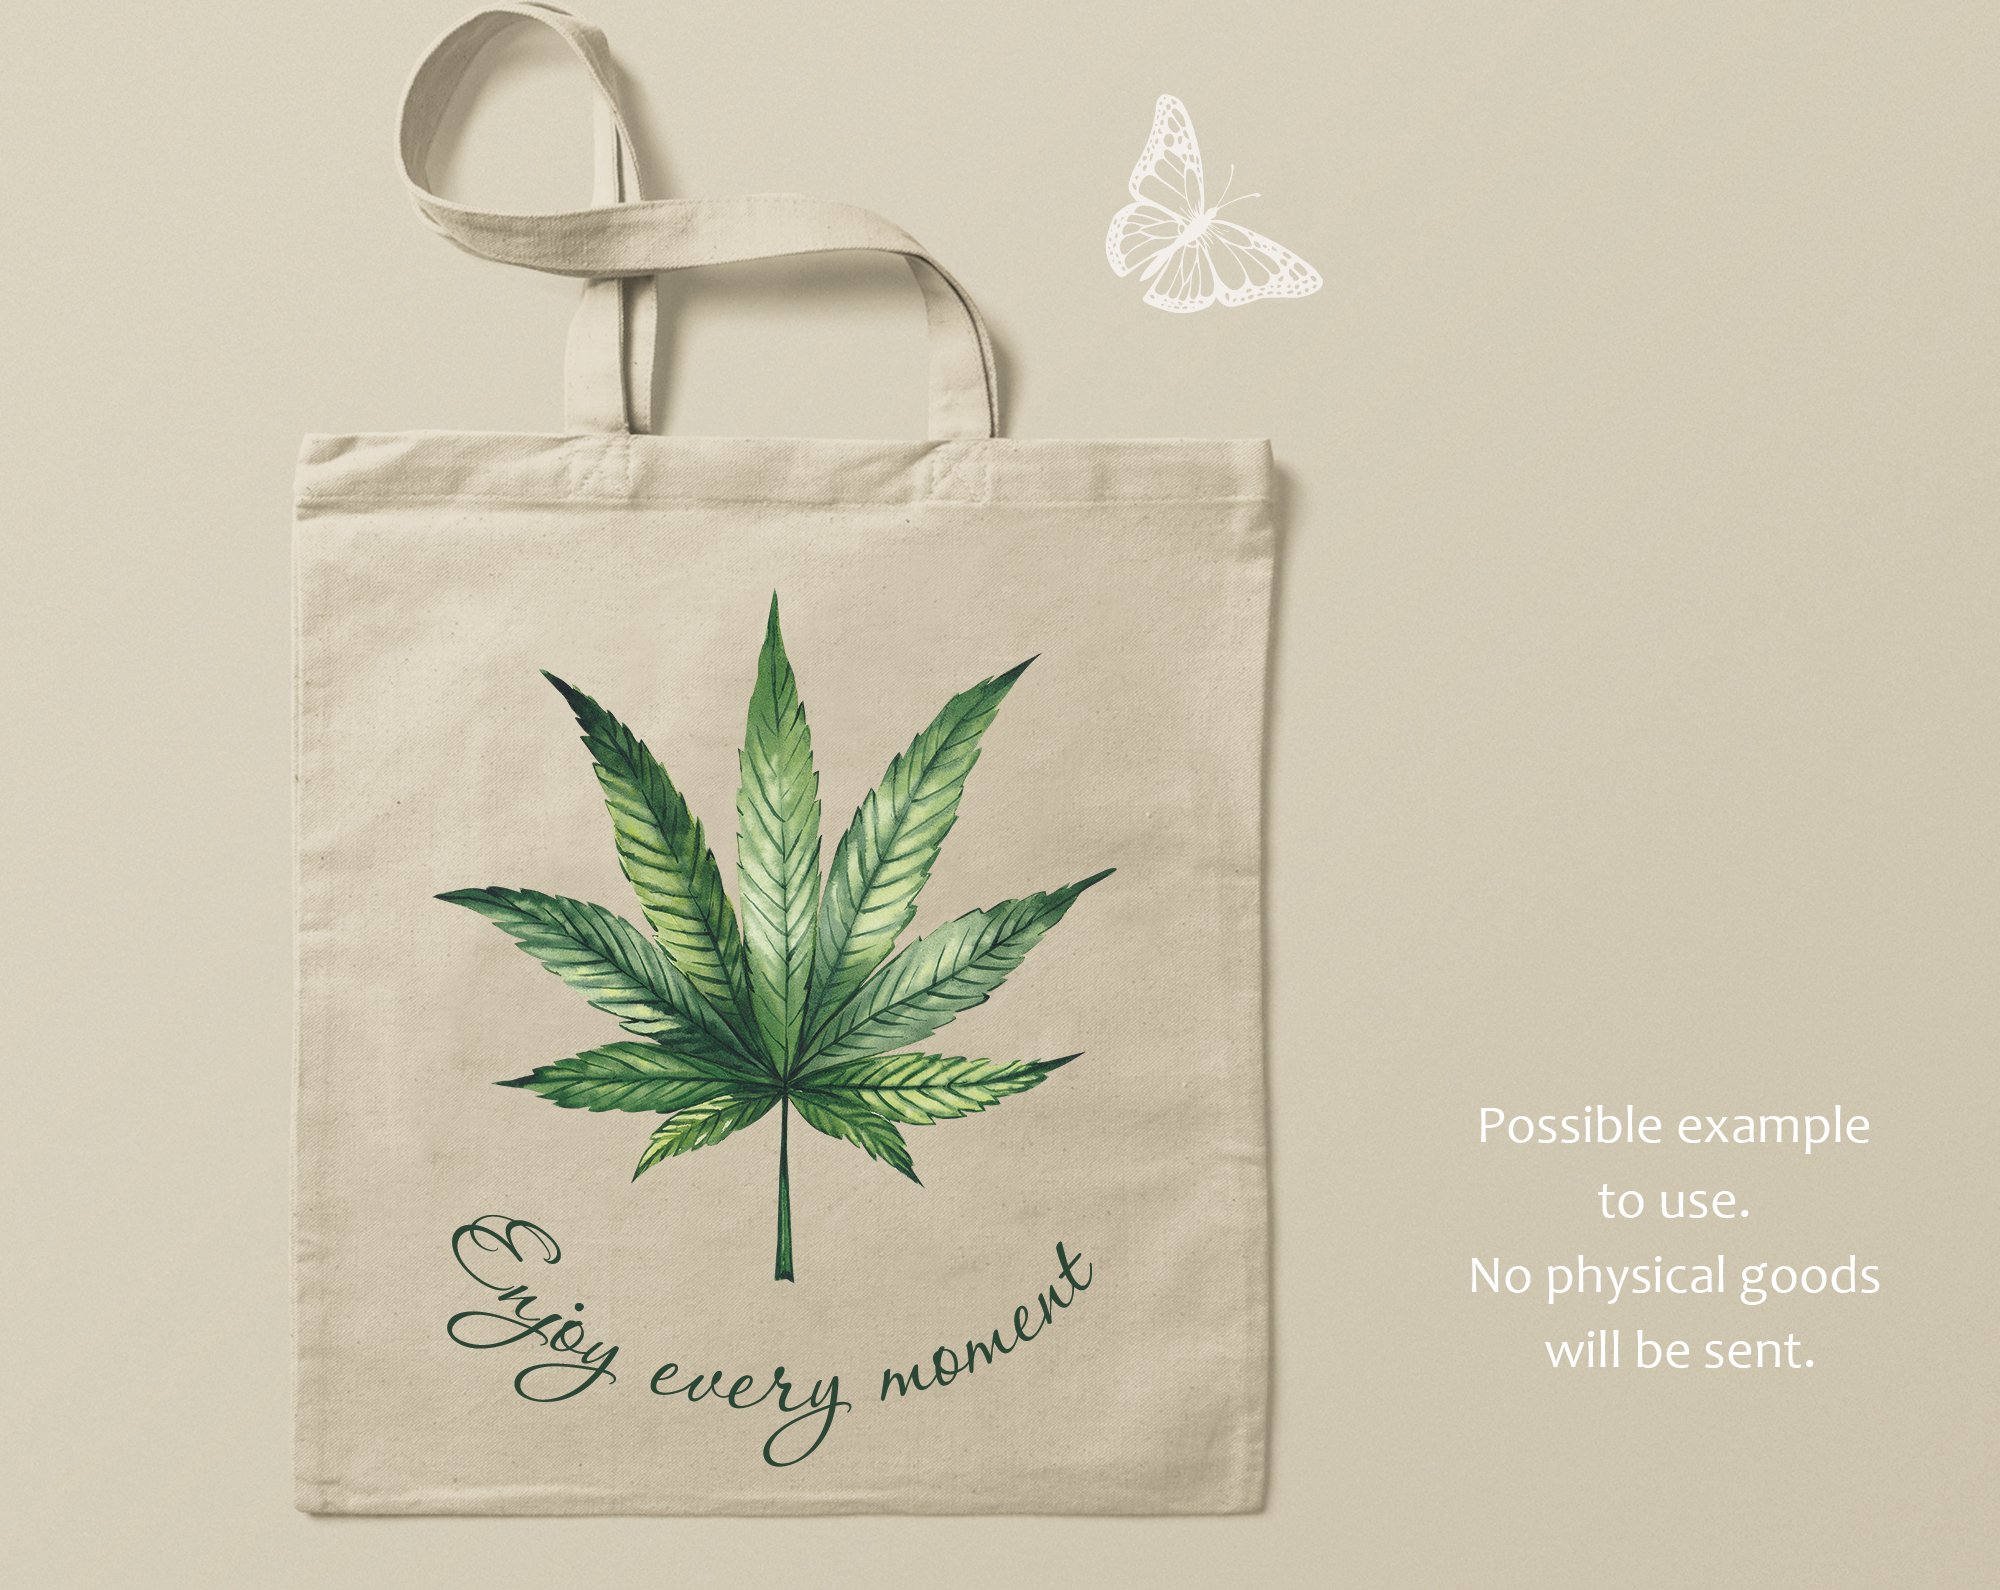 Image cannabis with the lettering "Enjoy every moment" on the shopper.